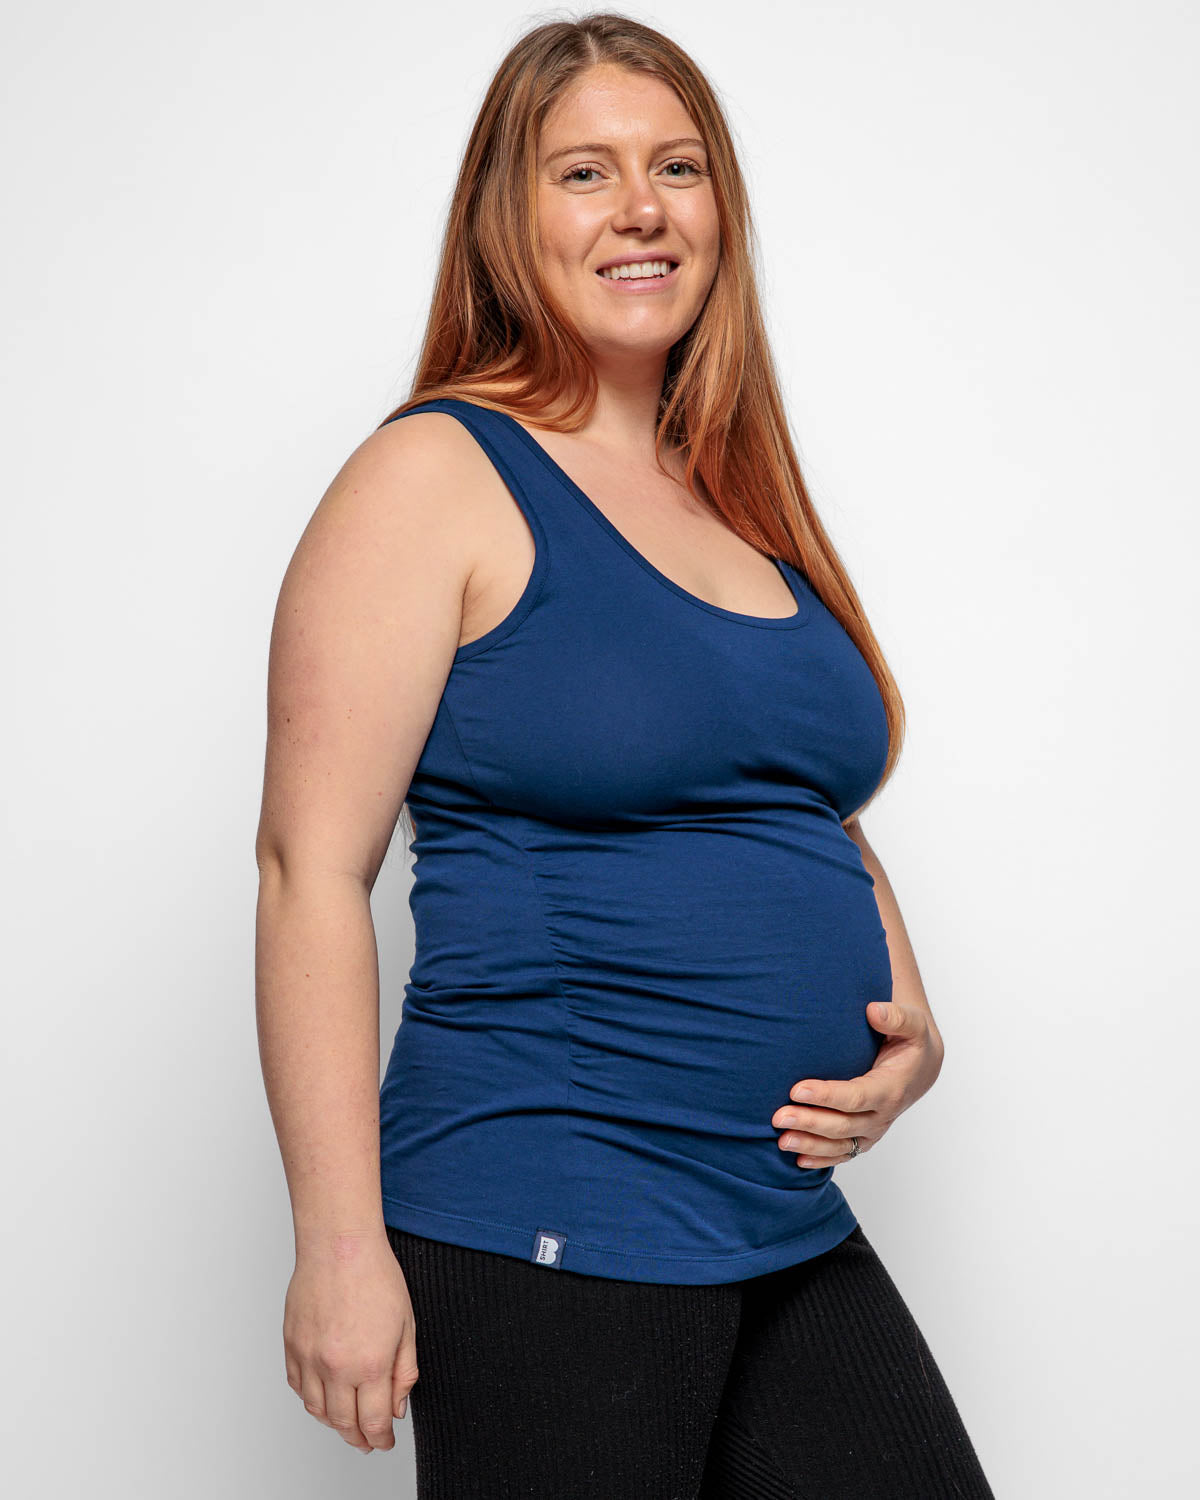 Maternity Vest Top in Navy Blue Organic Cotton for pregnancy